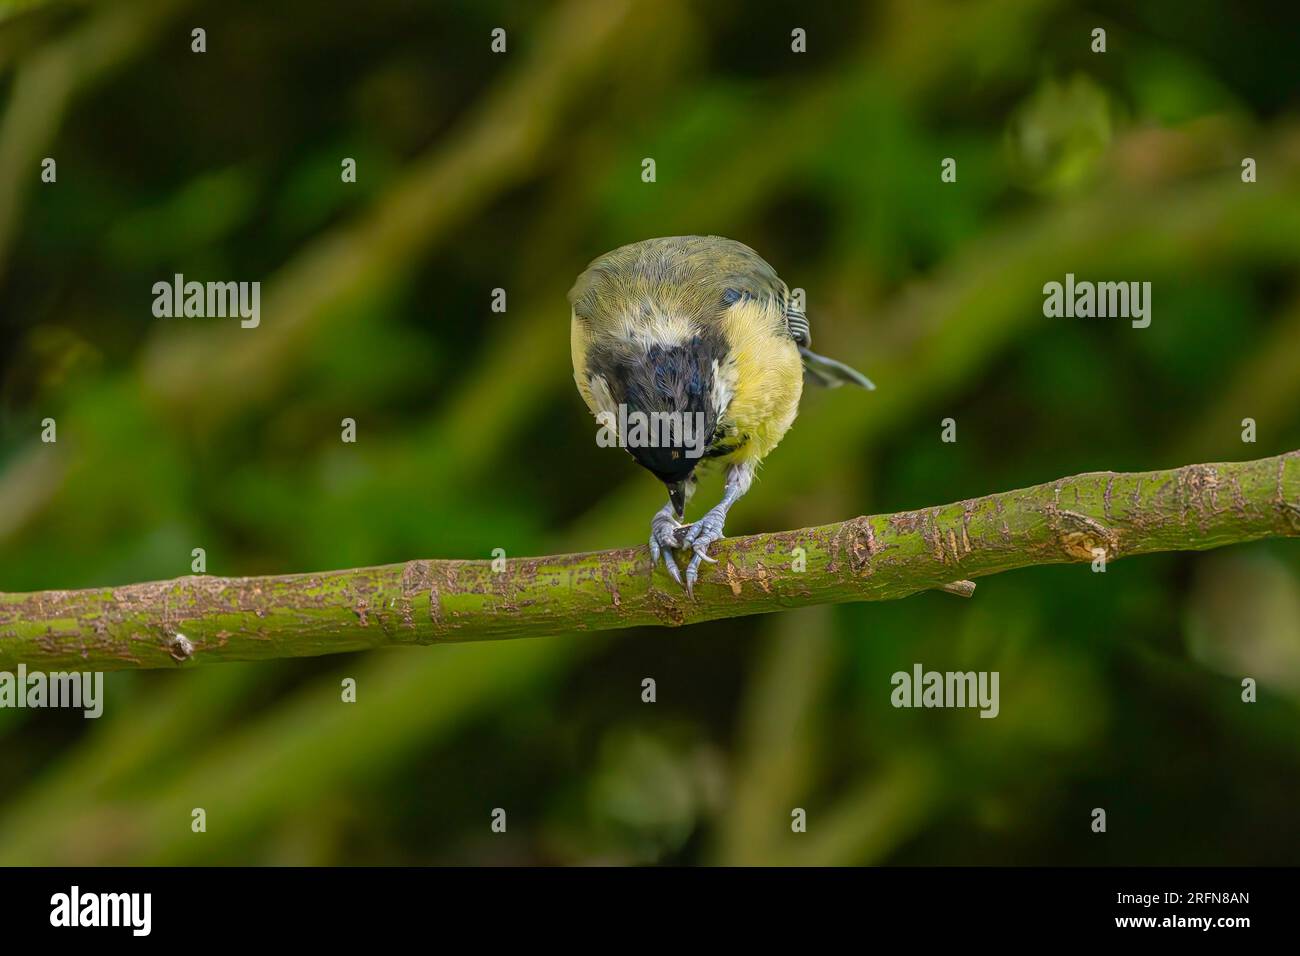 Great tit on a branch eating a seed Stock Photo